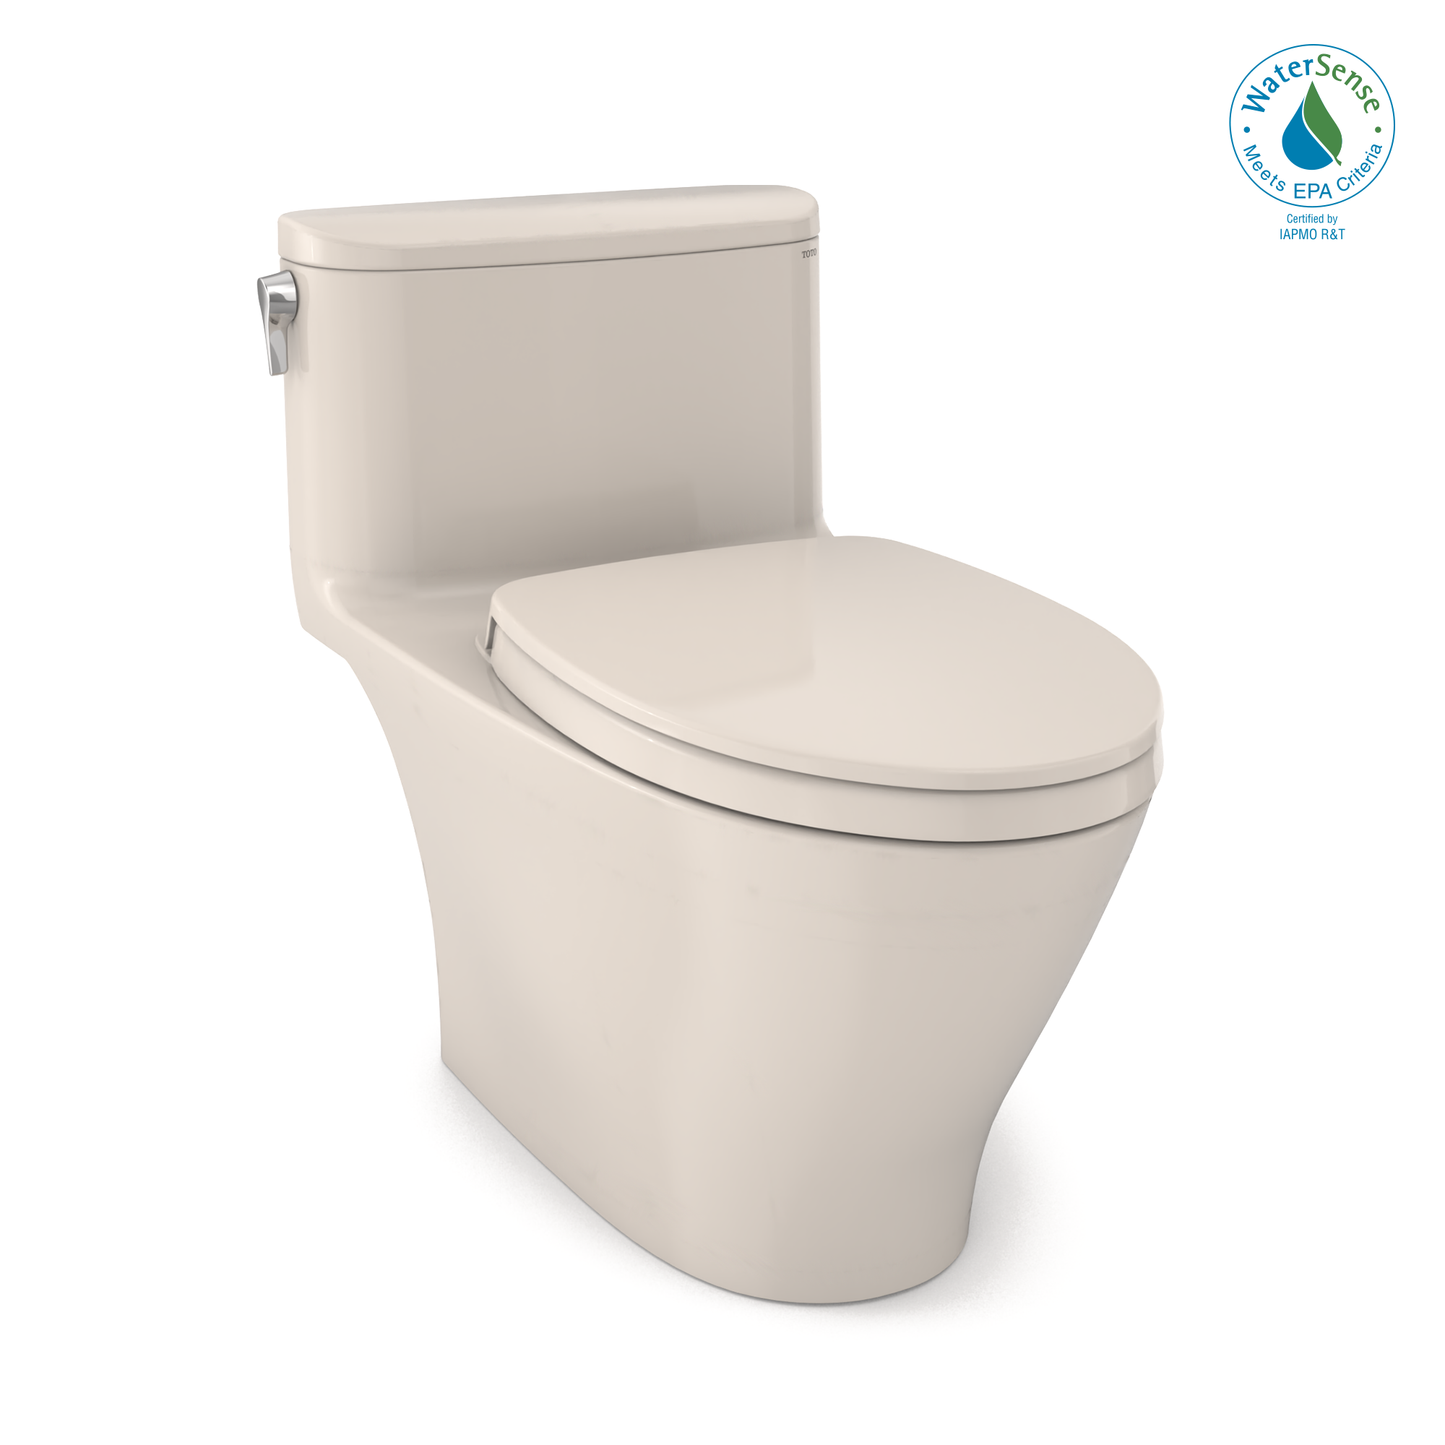 TOTO® Nexus® One-Piece Elongated 1.28 GPF Universal Height Toilet with CEFIONTECT® and SS124 SoftClose Seat, WASHLET®+ Ready - MS642124CEFG